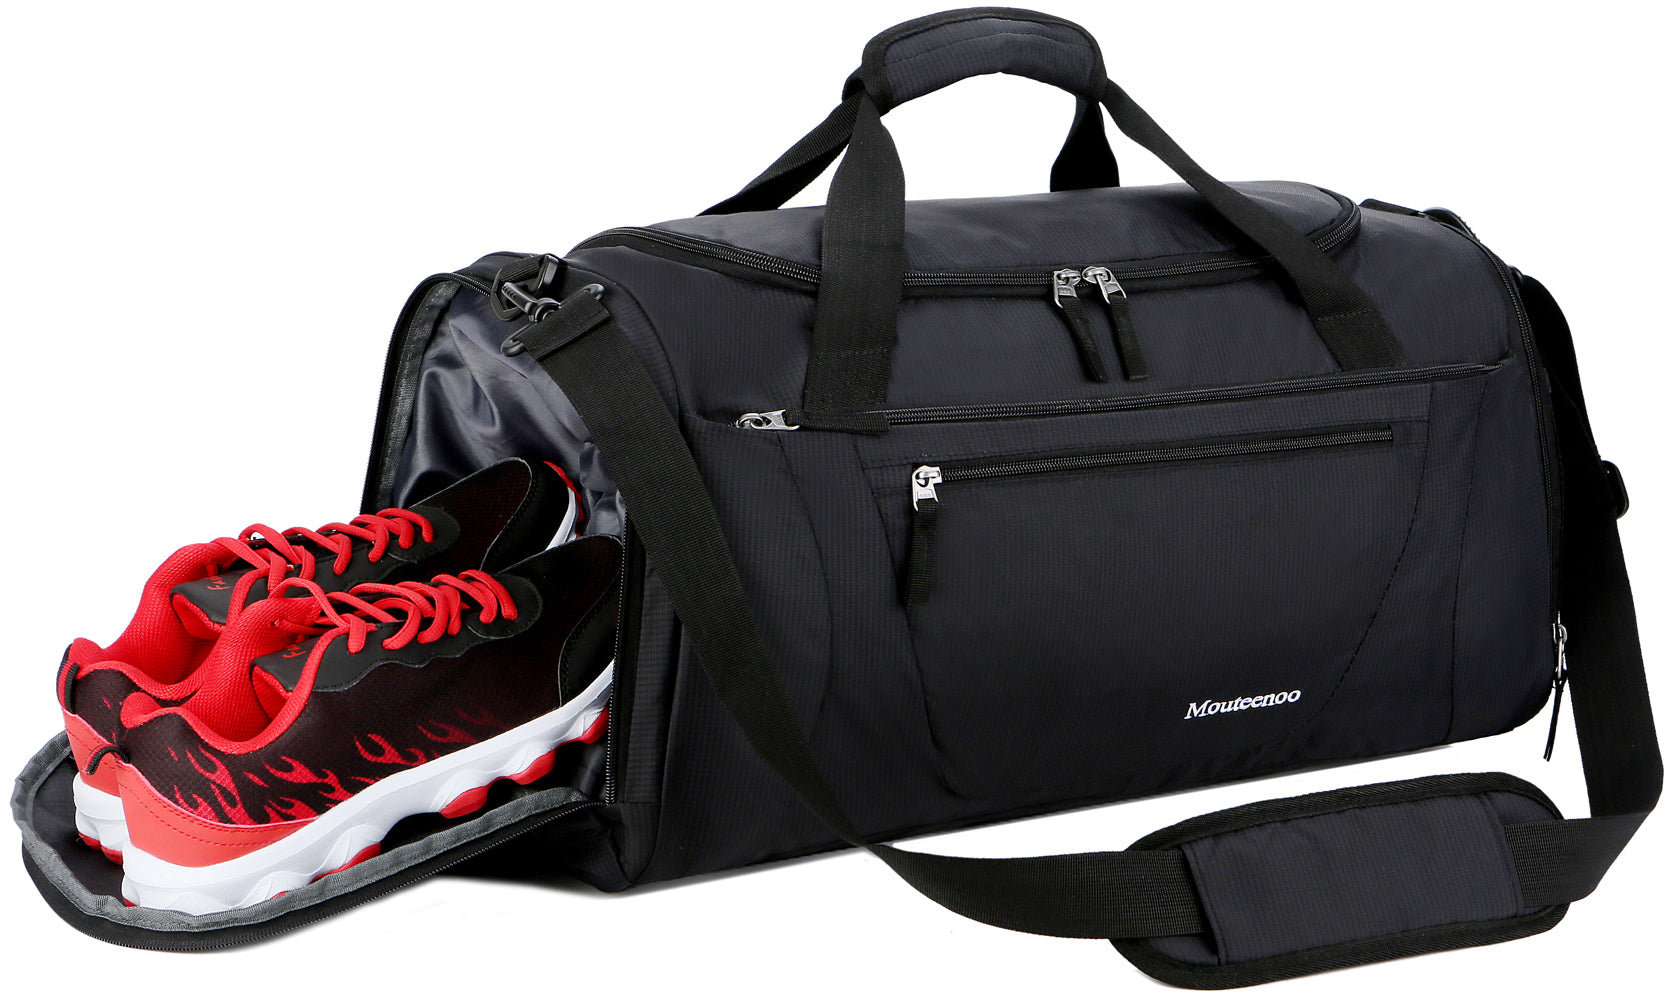  Lfzhjzc Gym Bag, with Shoes Compartment Gym Bags for Men,  Lightweight Duffle Bag Large Size, for Traveling Overnight Camping Climb  Sports (Color : Black, Size : 40L) : Clothing, Shoes & Jewelry